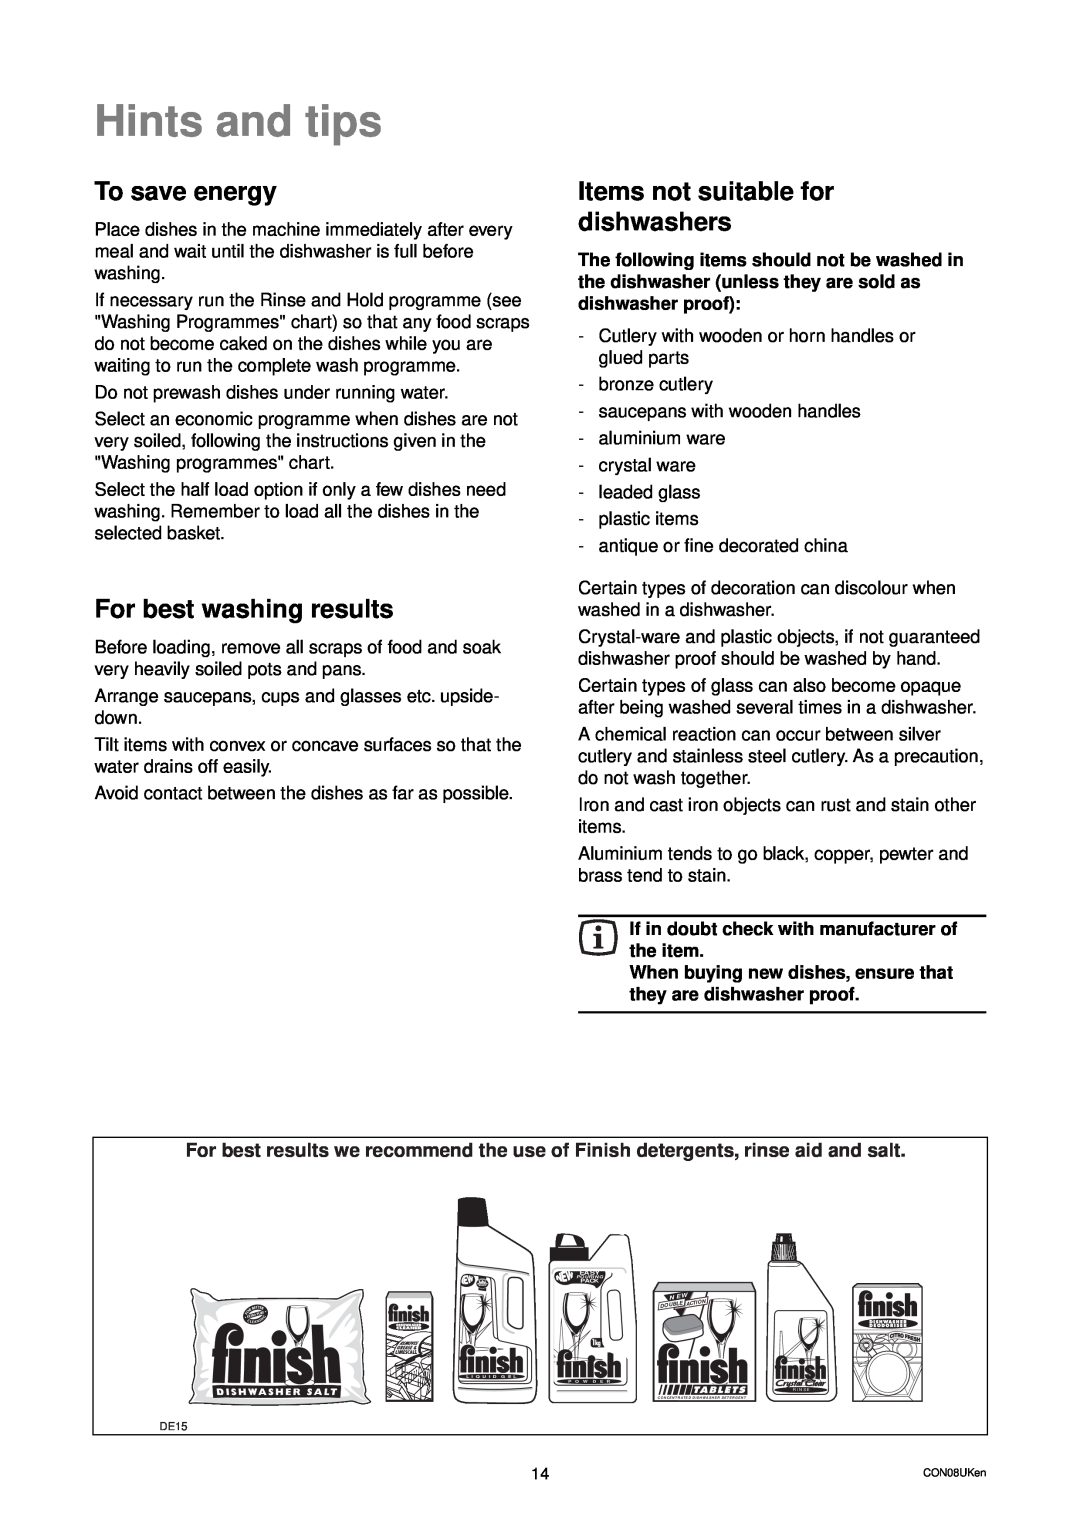 Zanussi DES 959 manual Hints and tips, To save energy, For best washing results, Items not suitable for dishwashers 